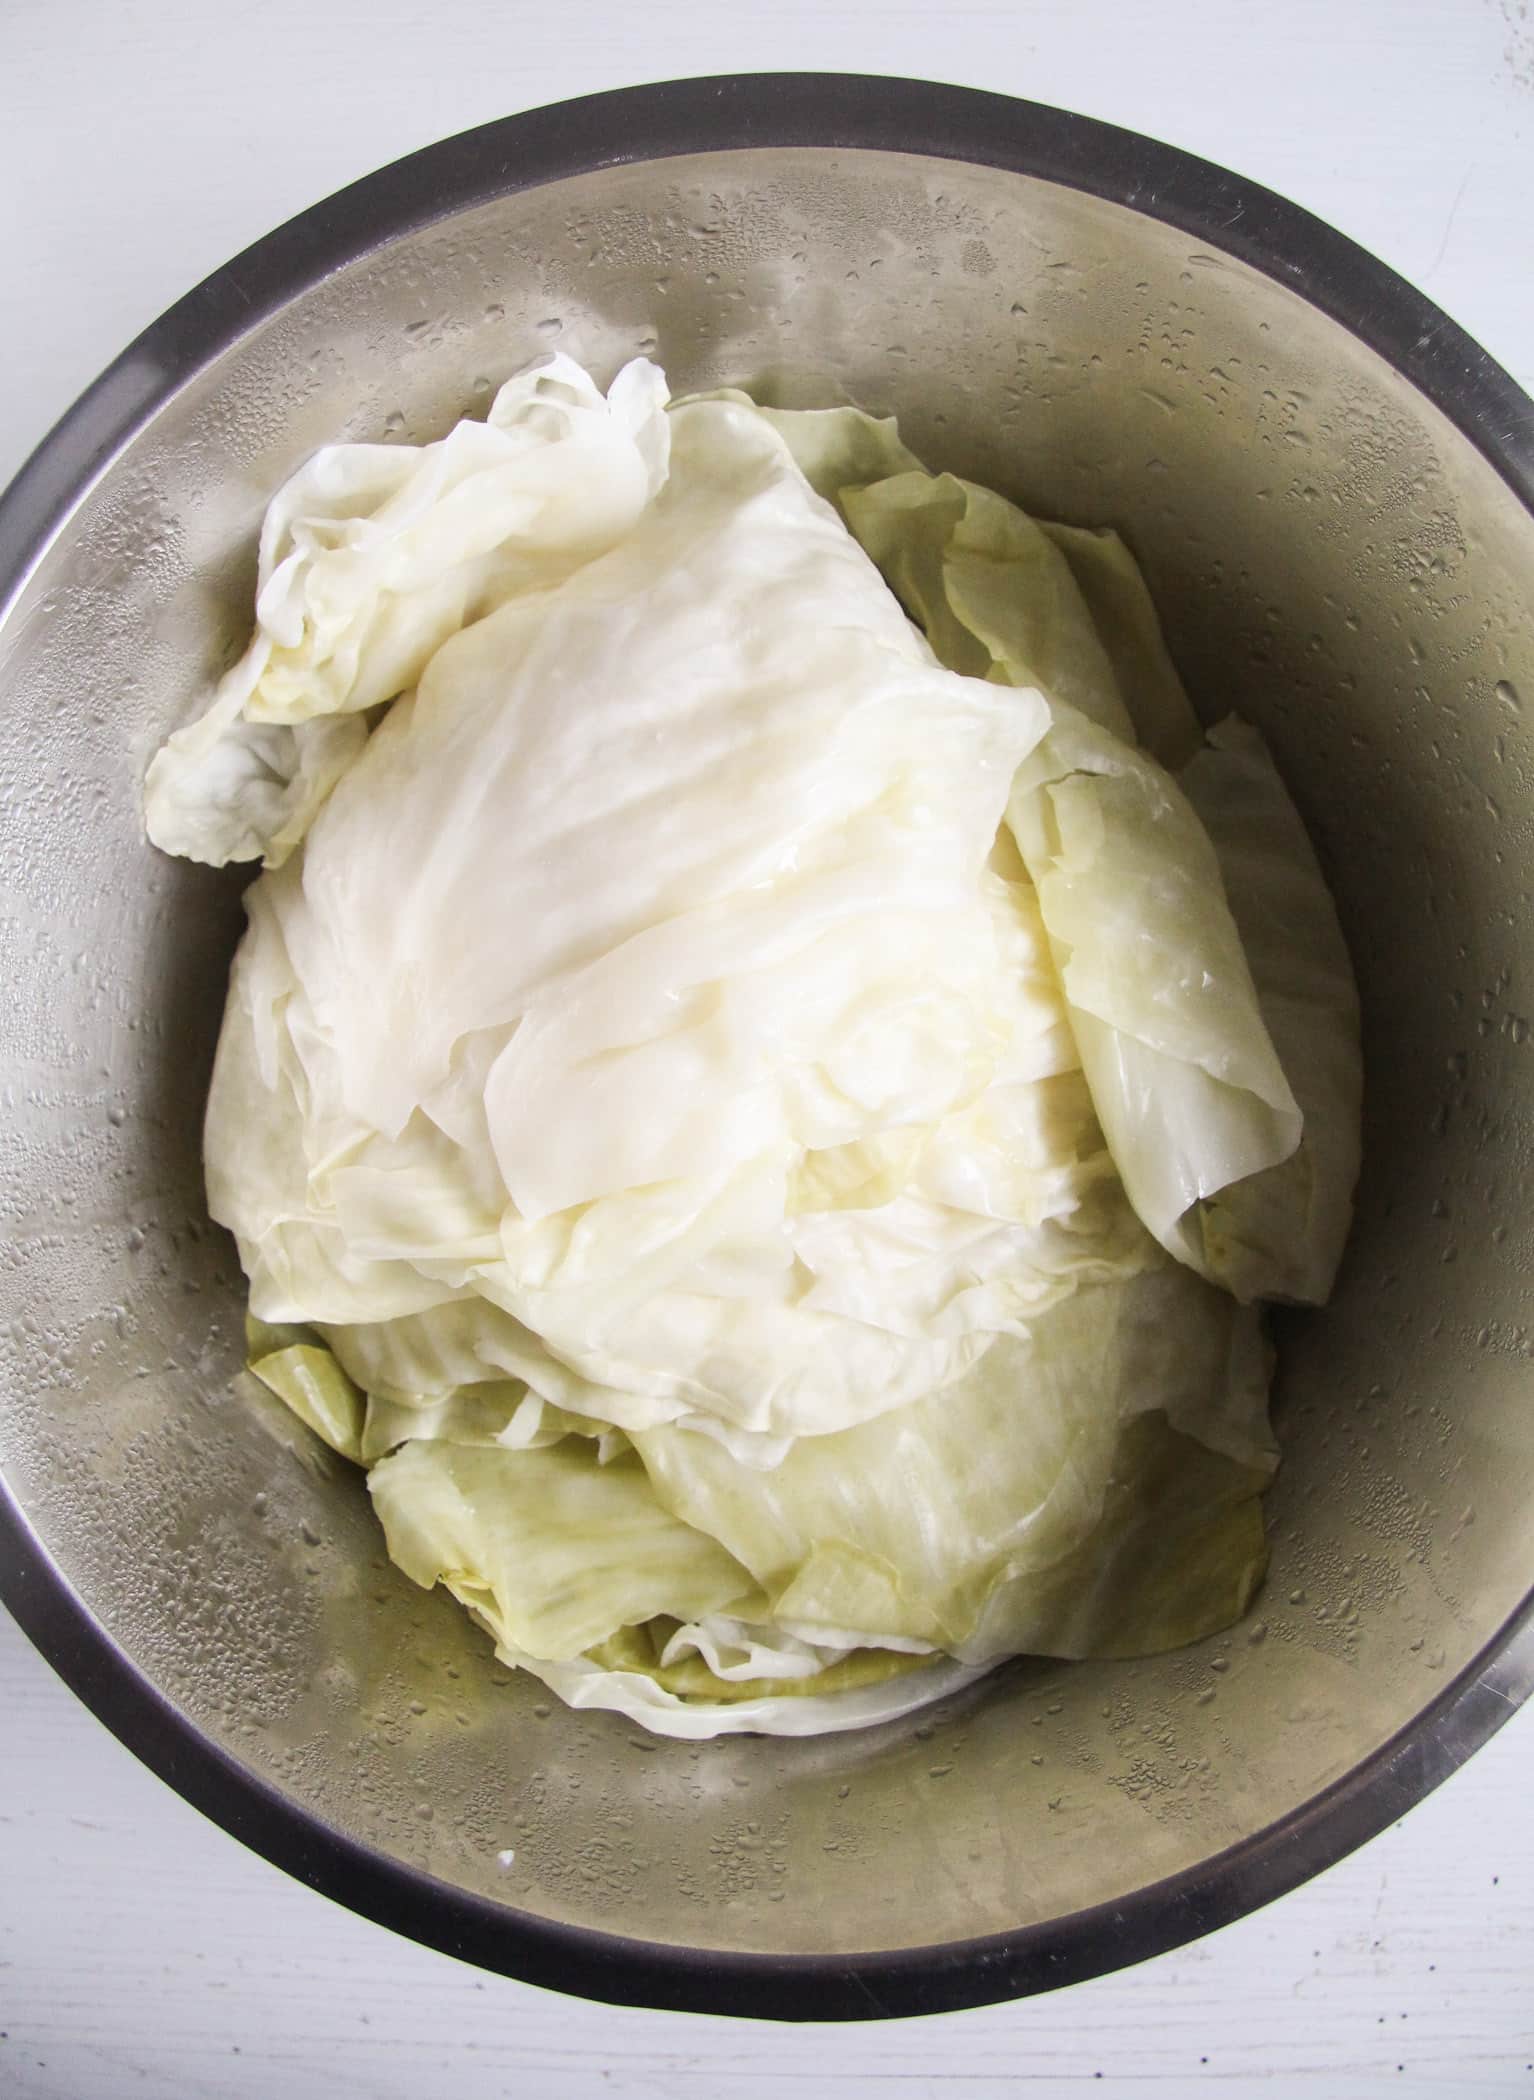 cabbage leaves prepared for stuffing in a bowl.